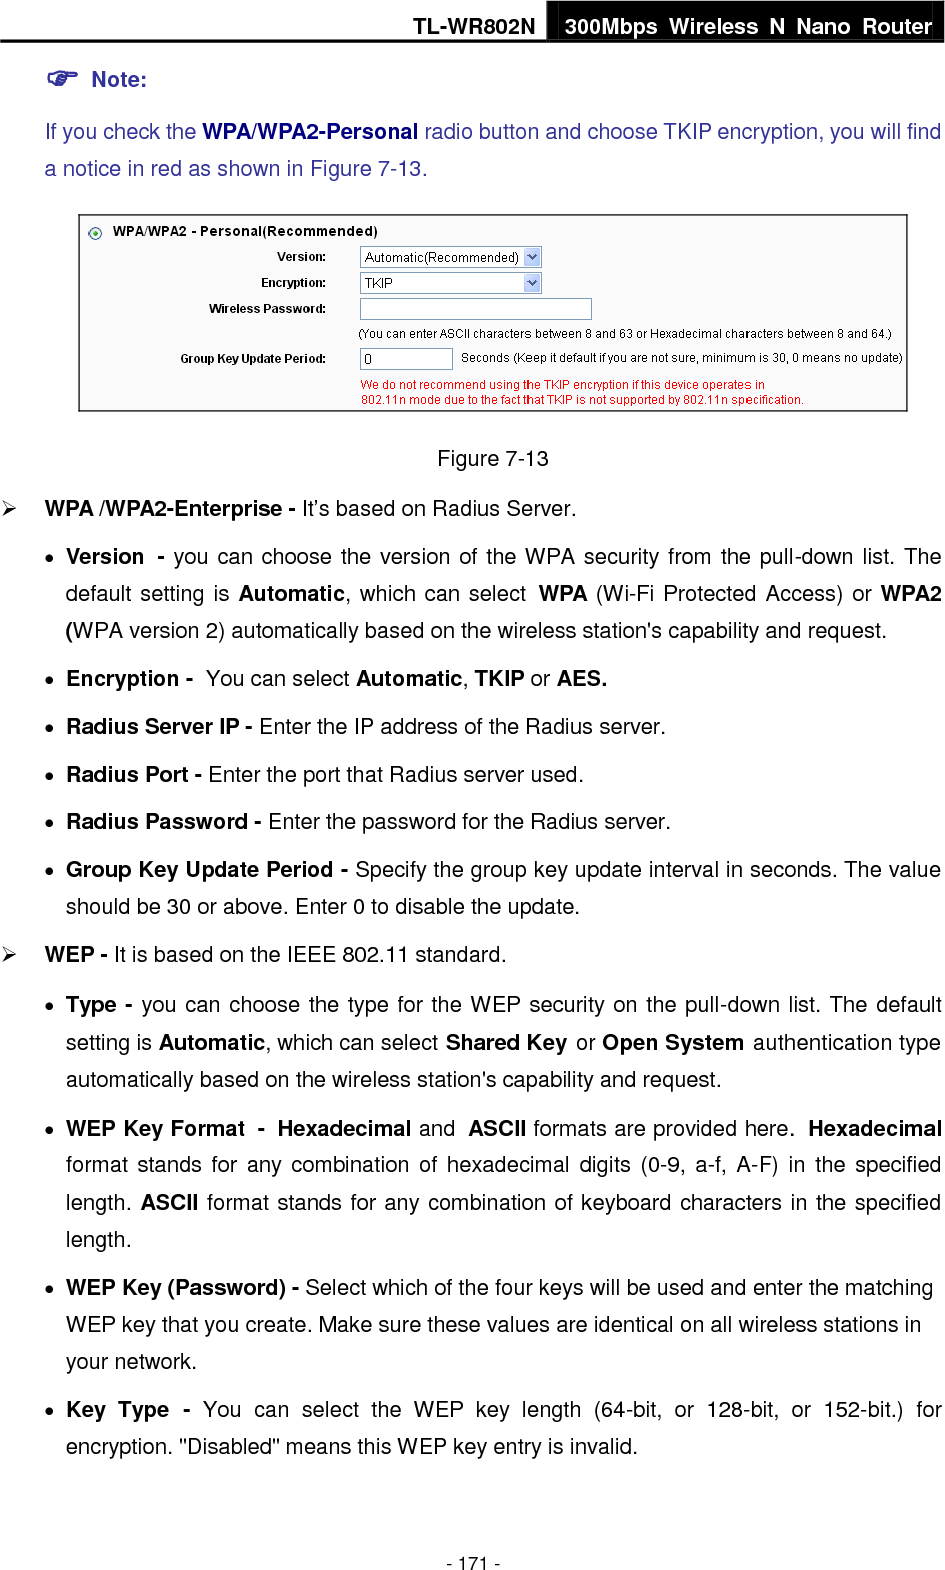 TL-WR802N 300Mbps  Wireless  N  Nano  Router  - 171 -  Note:   If you check the WPA/WPA2-Personal radio button and choose TKIP encryption, you will find a notice in red as shown in Figure 7-13.  Figure 7-13  WPA /WPA2-Enterprise - It’s based on Radius Server.  Version - you can choose the version of the WPA security from the pull-down list. The default setting is Automatic, which can select WPA (Wi-Fi Protected Access) or WPA2 (WPA version 2) automatically based on the wireless station&apos;s capability and request.  Encryption - You can select Automatic, TKIP or AES.  Radius Server IP - Enter the IP address of the Radius server.  Radius Port - Enter the port that Radius server used.  Radius Password - Enter the password for the Radius server.  Group Key Update Period - Specify the group key update interval in seconds. The value should be 30 or above. Enter 0 to disable the update.  WEP - It is based on the IEEE 802.11 standard.    Type - you can choose the type for the WEP security on the pull-down list. The default setting is Automatic, which can select Shared Key or Open System authentication type automatically based on the wireless station&apos;s capability and request.  WEP Key Format - Hexadecimal and ASCII formats are provided here. Hexadecimal format stands  for any  combination of  hexadecimal  digits  (0-9, a-f,  A-F)  in  the specified length. ASCII format stands for any combination of keyboard characters in the specified length.    WEP Key (Password) - Select which of the four keys will be used and enter the matching WEP key that you create. Make sure these values are identical on all wireless stations in your network.    Key  Type -  You  can  select  the  WEP  key  length  (64-bit,  or  128-bit,  or  152-bit.)  for encryption. &quot;Disabled&quot; means this WEP key entry is invalid. 